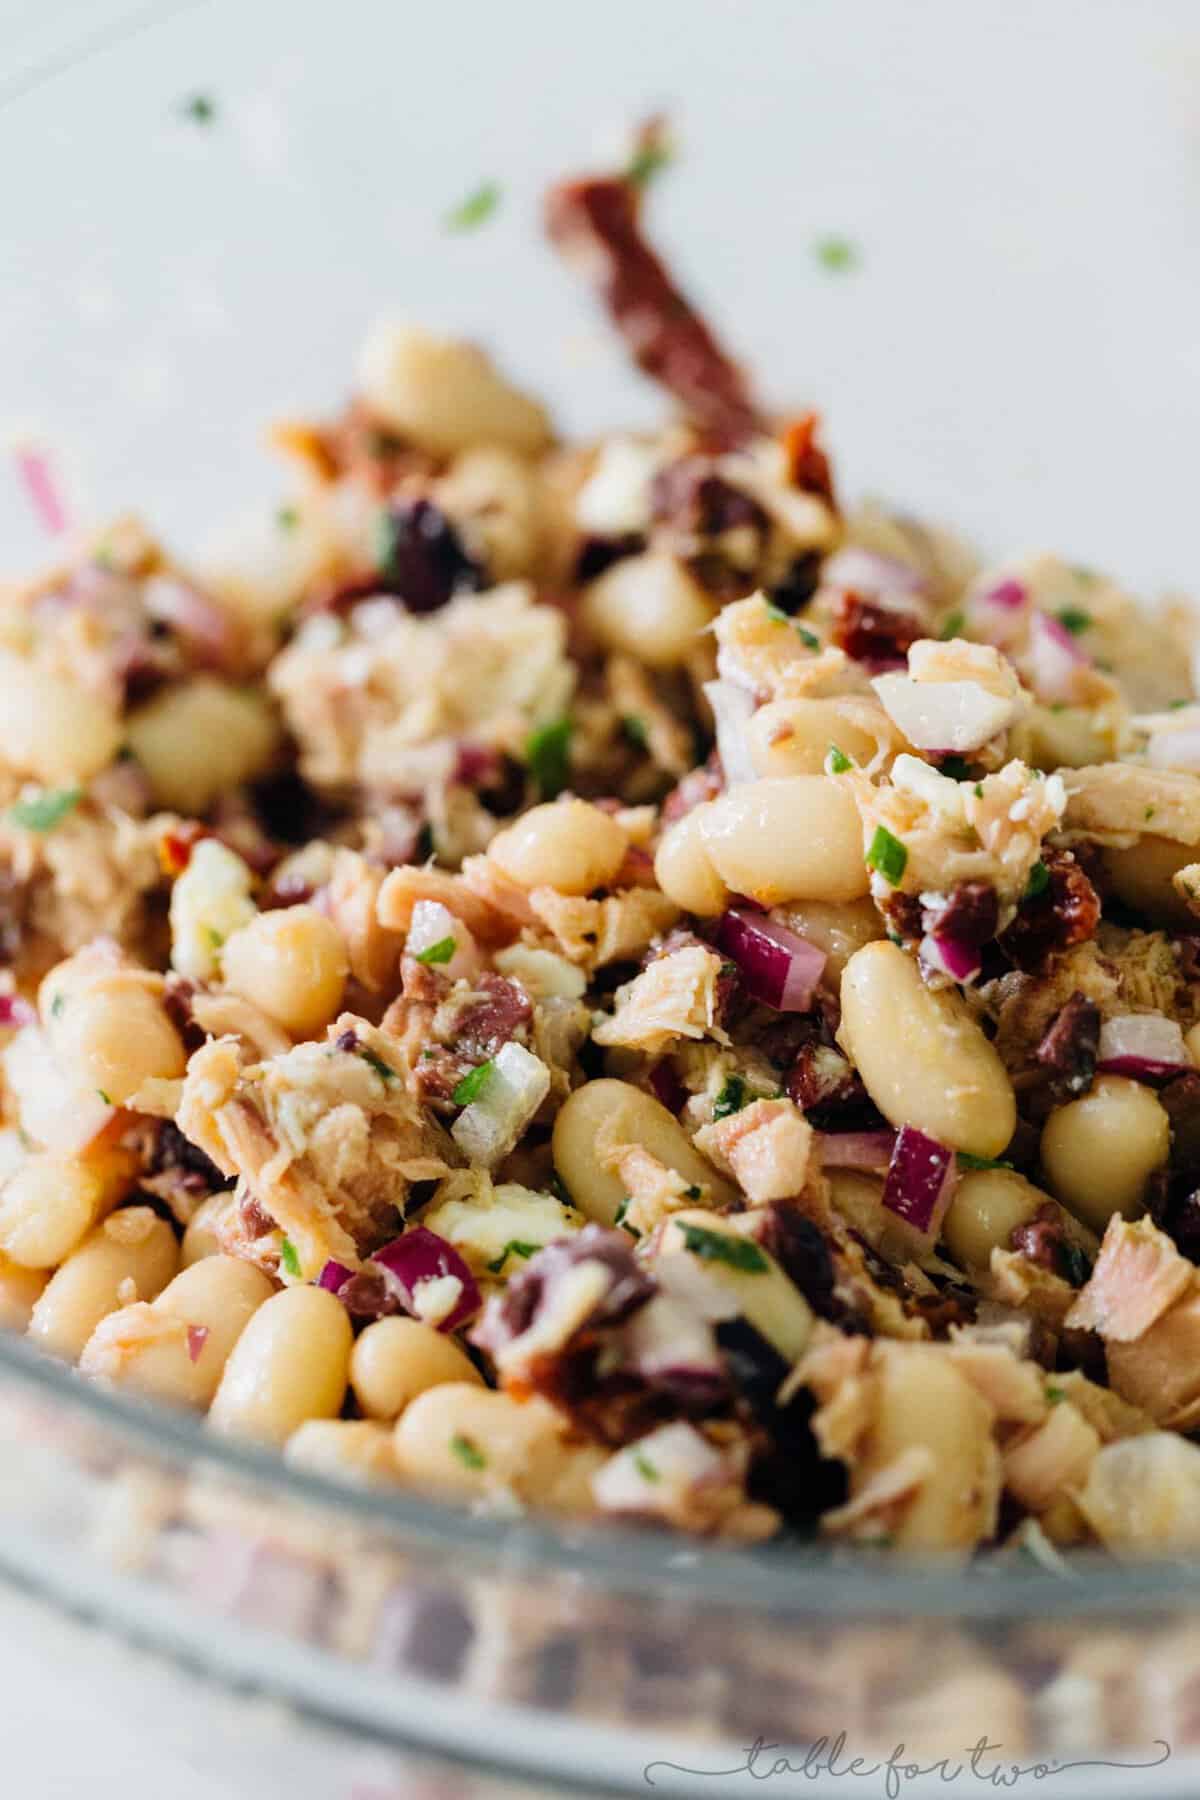 Mediterranean tuna white bean salad is full of flavorful ingredients and deliciously tasty tuna that is full of protein! An easy and healthy lunch option for those who are looking for new lunch ideas that will keep you full!